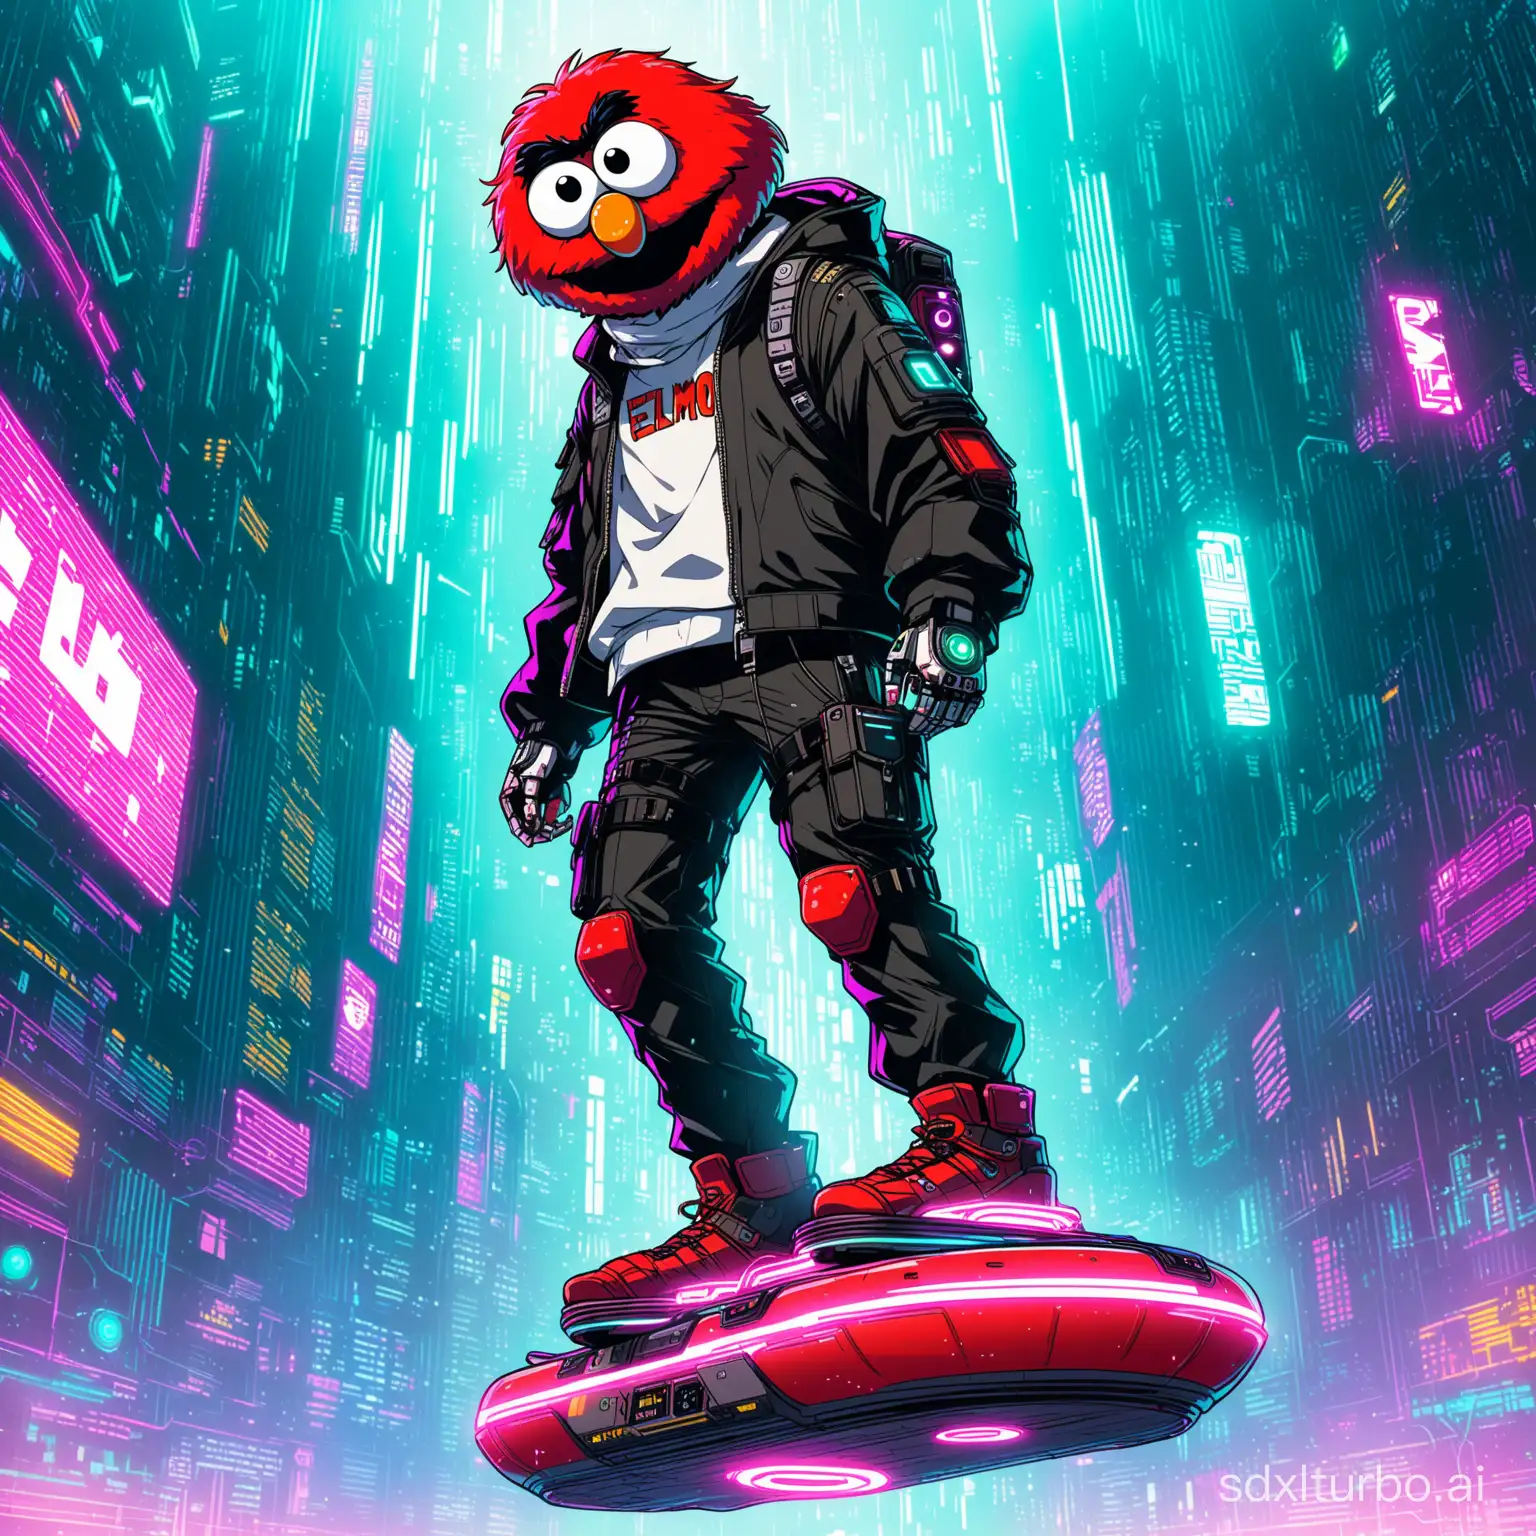 Cyberpunk-Anime-Solo-Guy-in-Elmo-Mask-on-Hoverboard